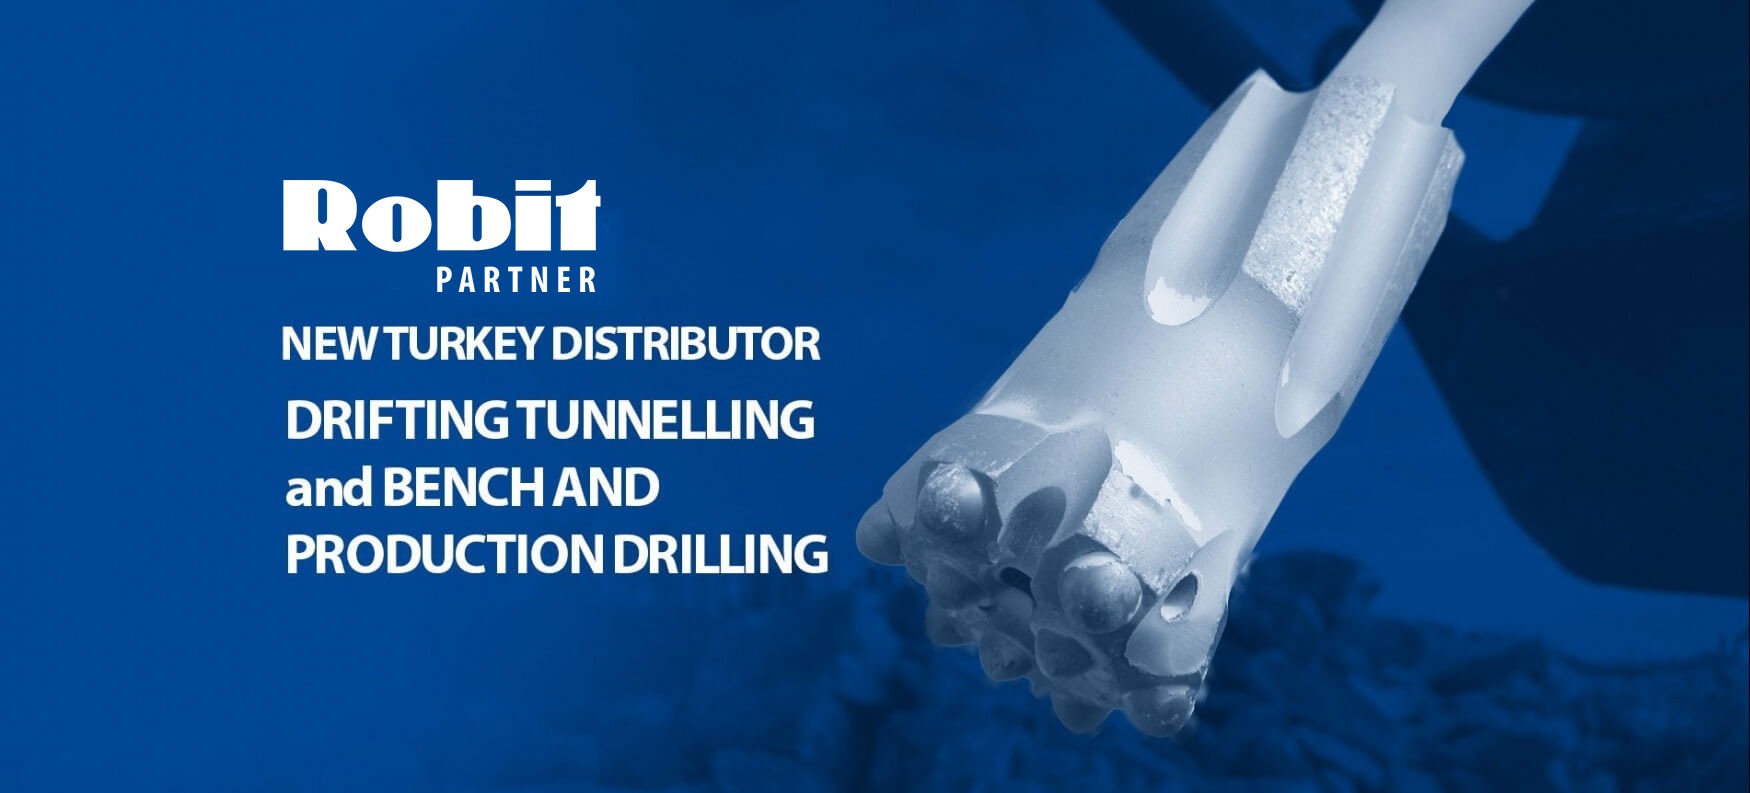 Robit New Turkey Distributer DriftingTunnelling and Benchand Production Drilling